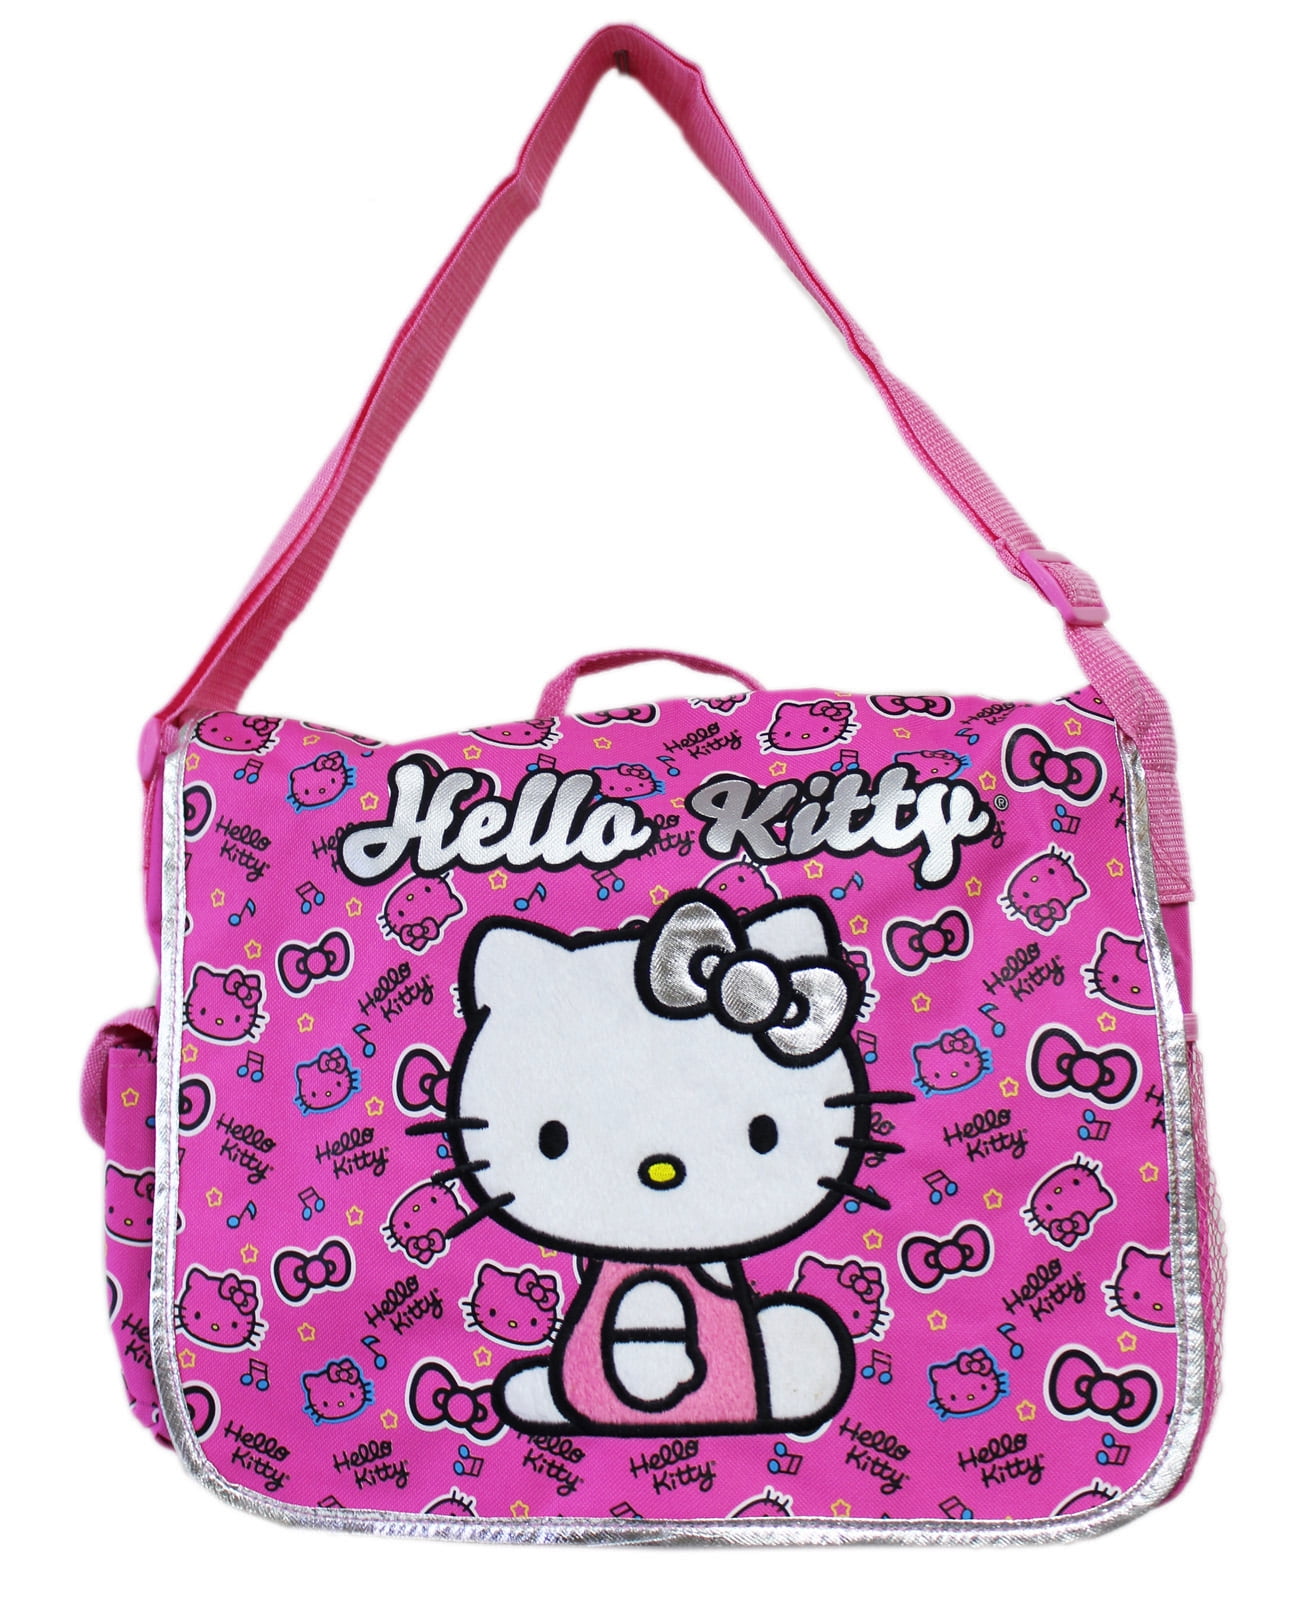 Sanrio's Hello Kitty Deep Pink Music Note and Hairbow Themed Messenger Bag  